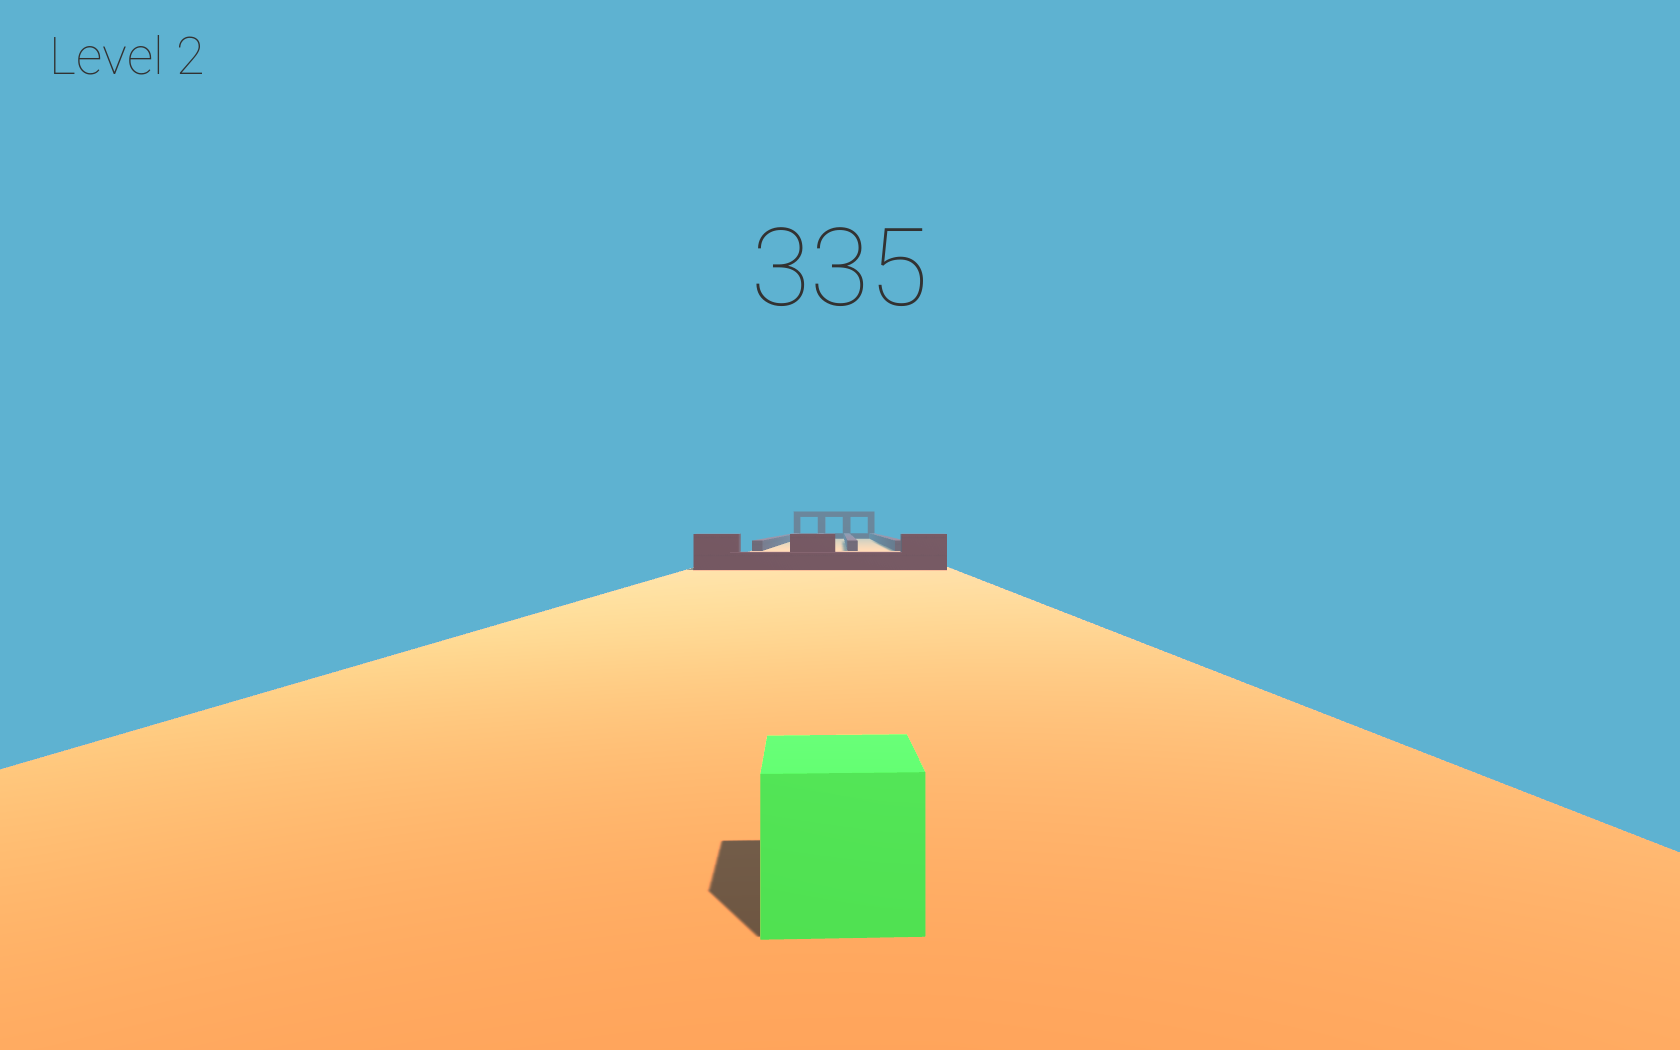 GitHub - Thanasis1101/CubeRun: A 3D arcade game made with Unity, tested ...